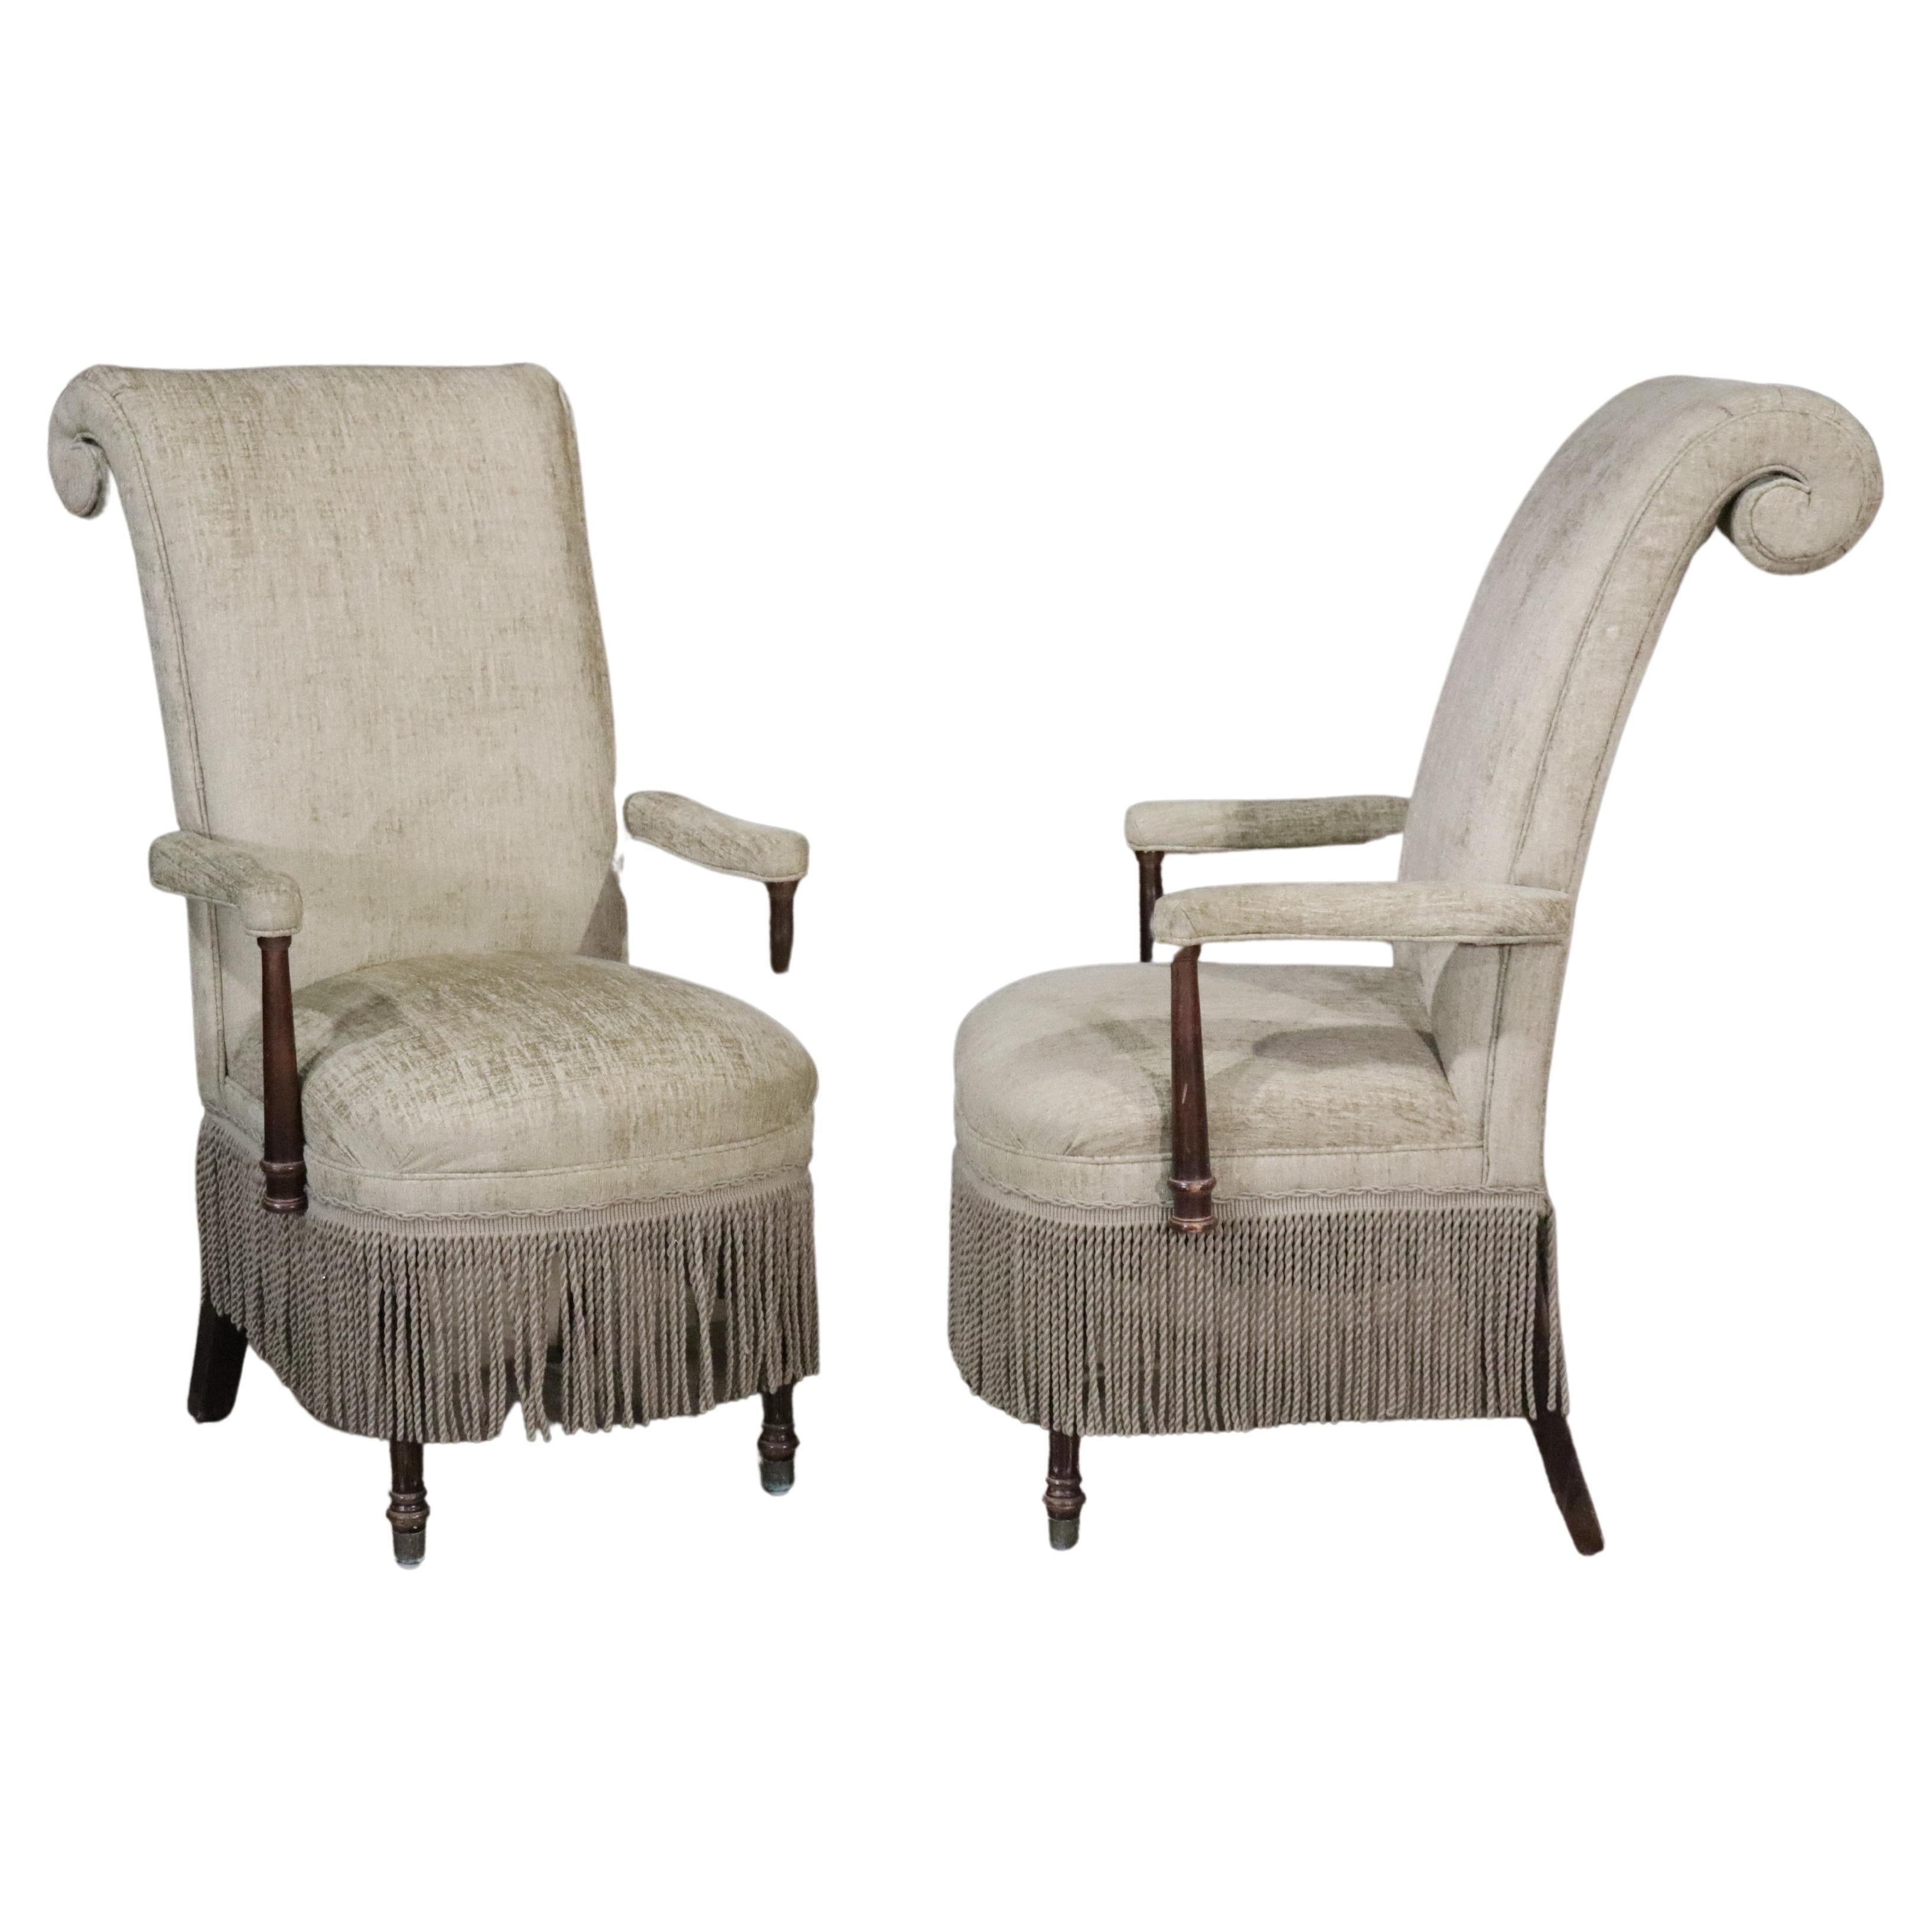 Pair of Scroll-back Armchairs  For Sale